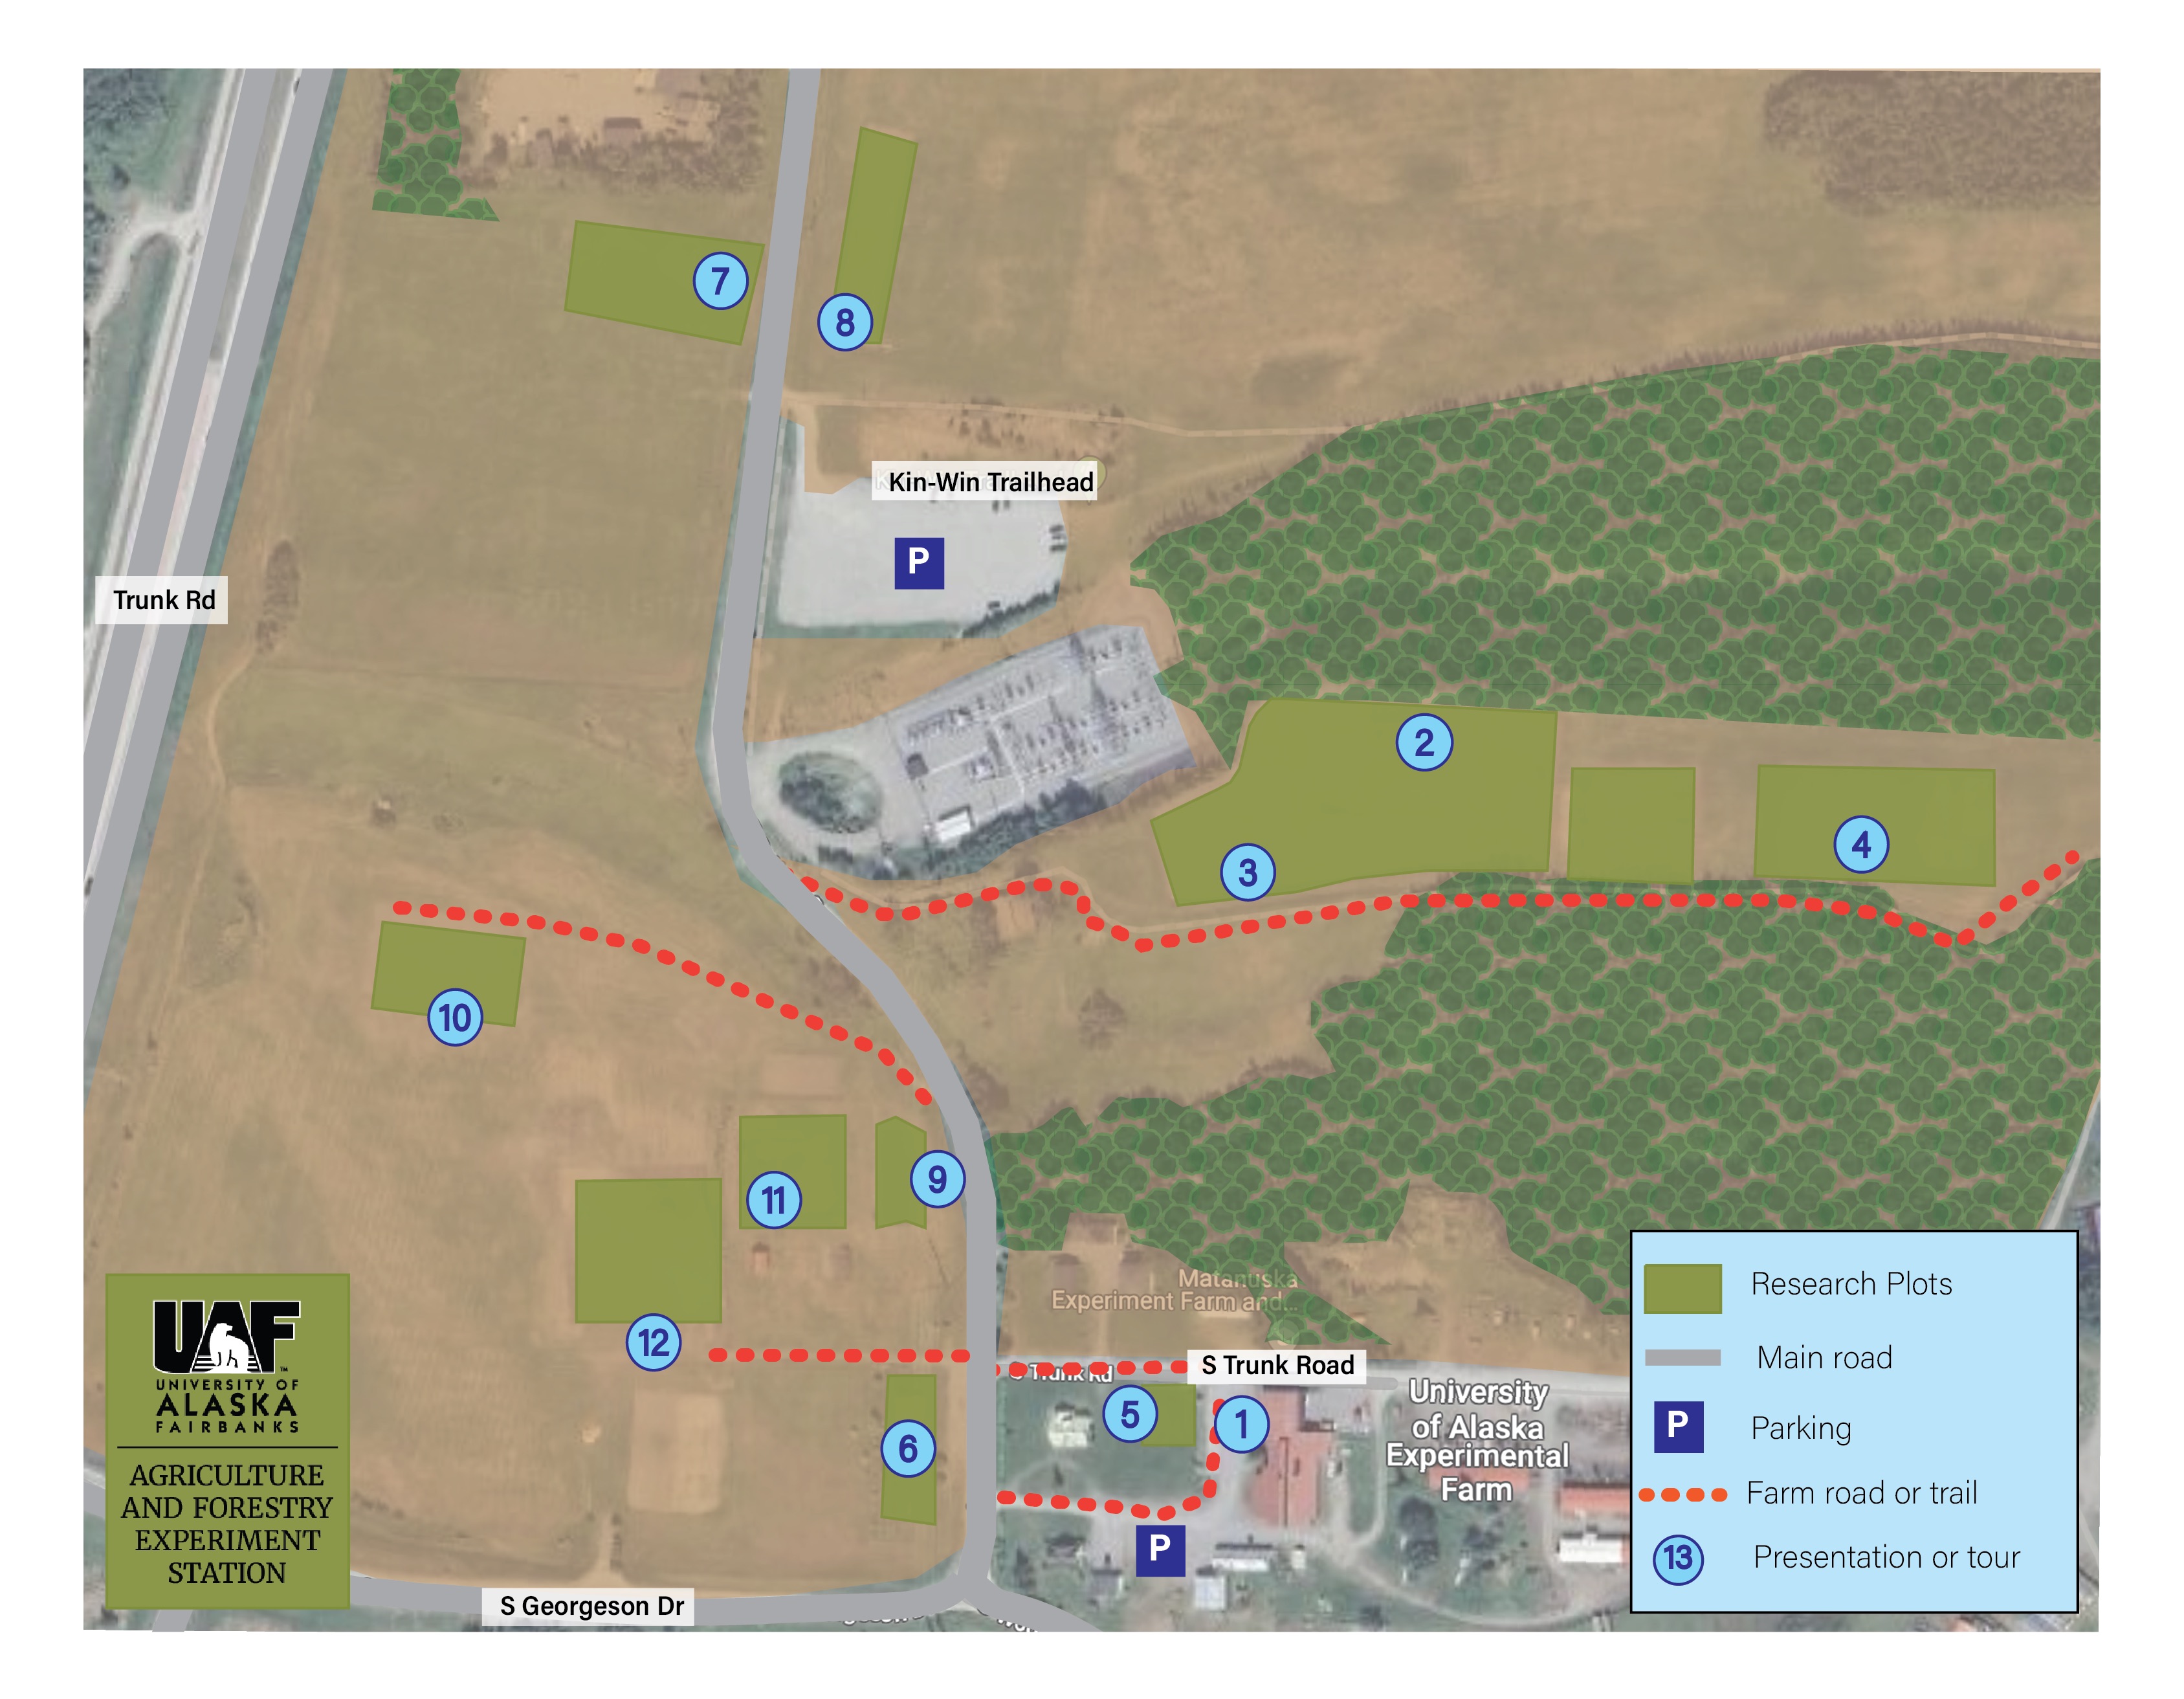 Map of the Matanuska Experiment Farm with research plots, roads and parking